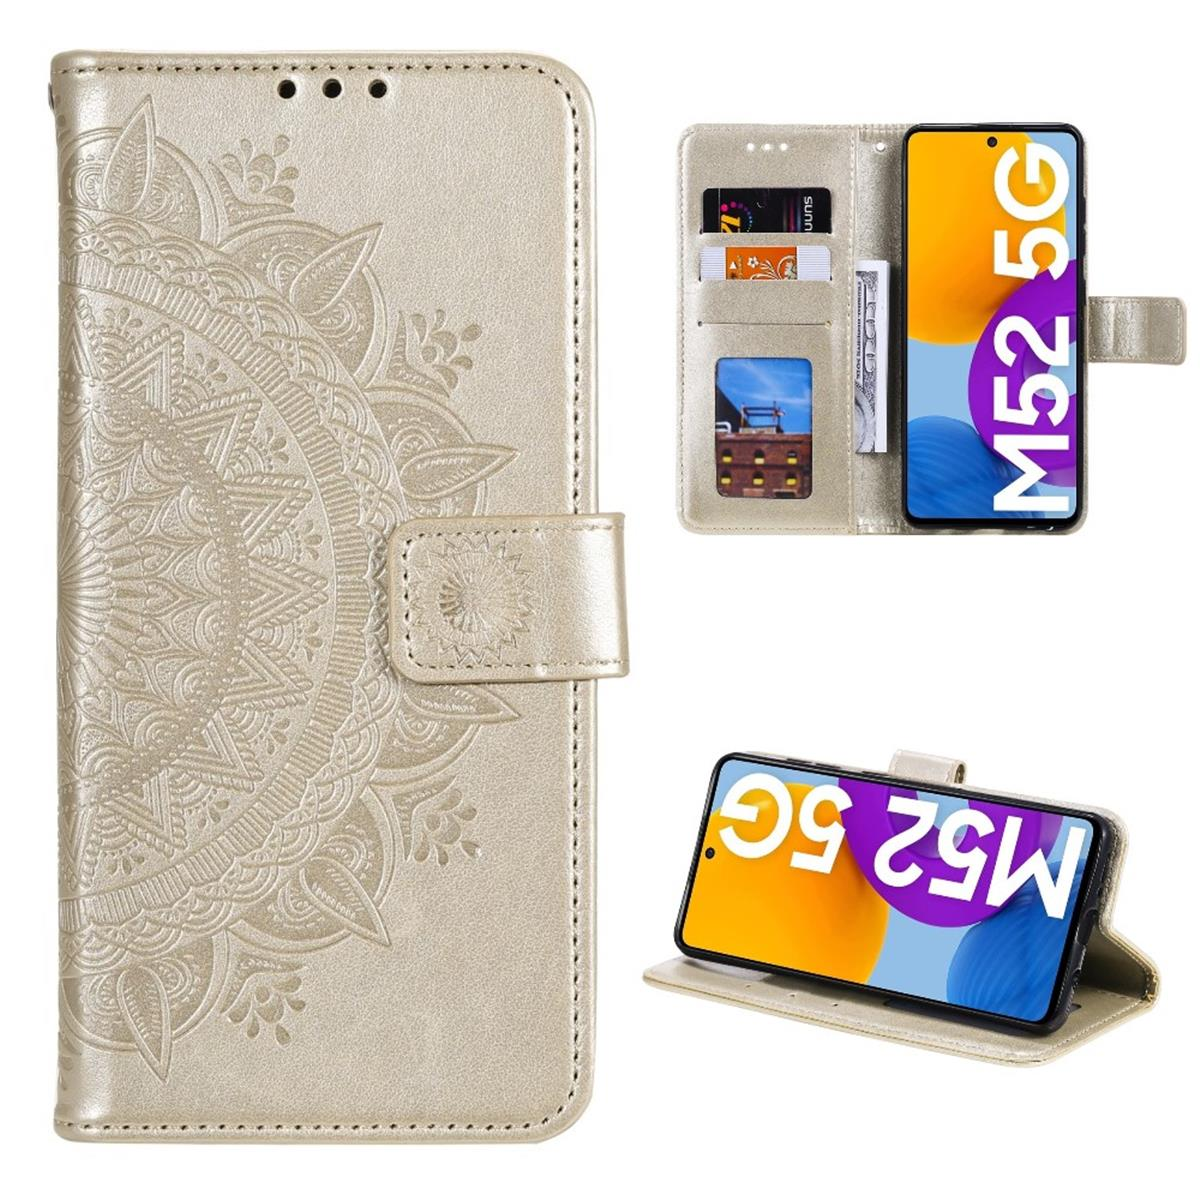 COVERKINGZ Klapphülle mit Mandala Muster, Gold 5G, Galaxy Samsung, M52 Bookcover